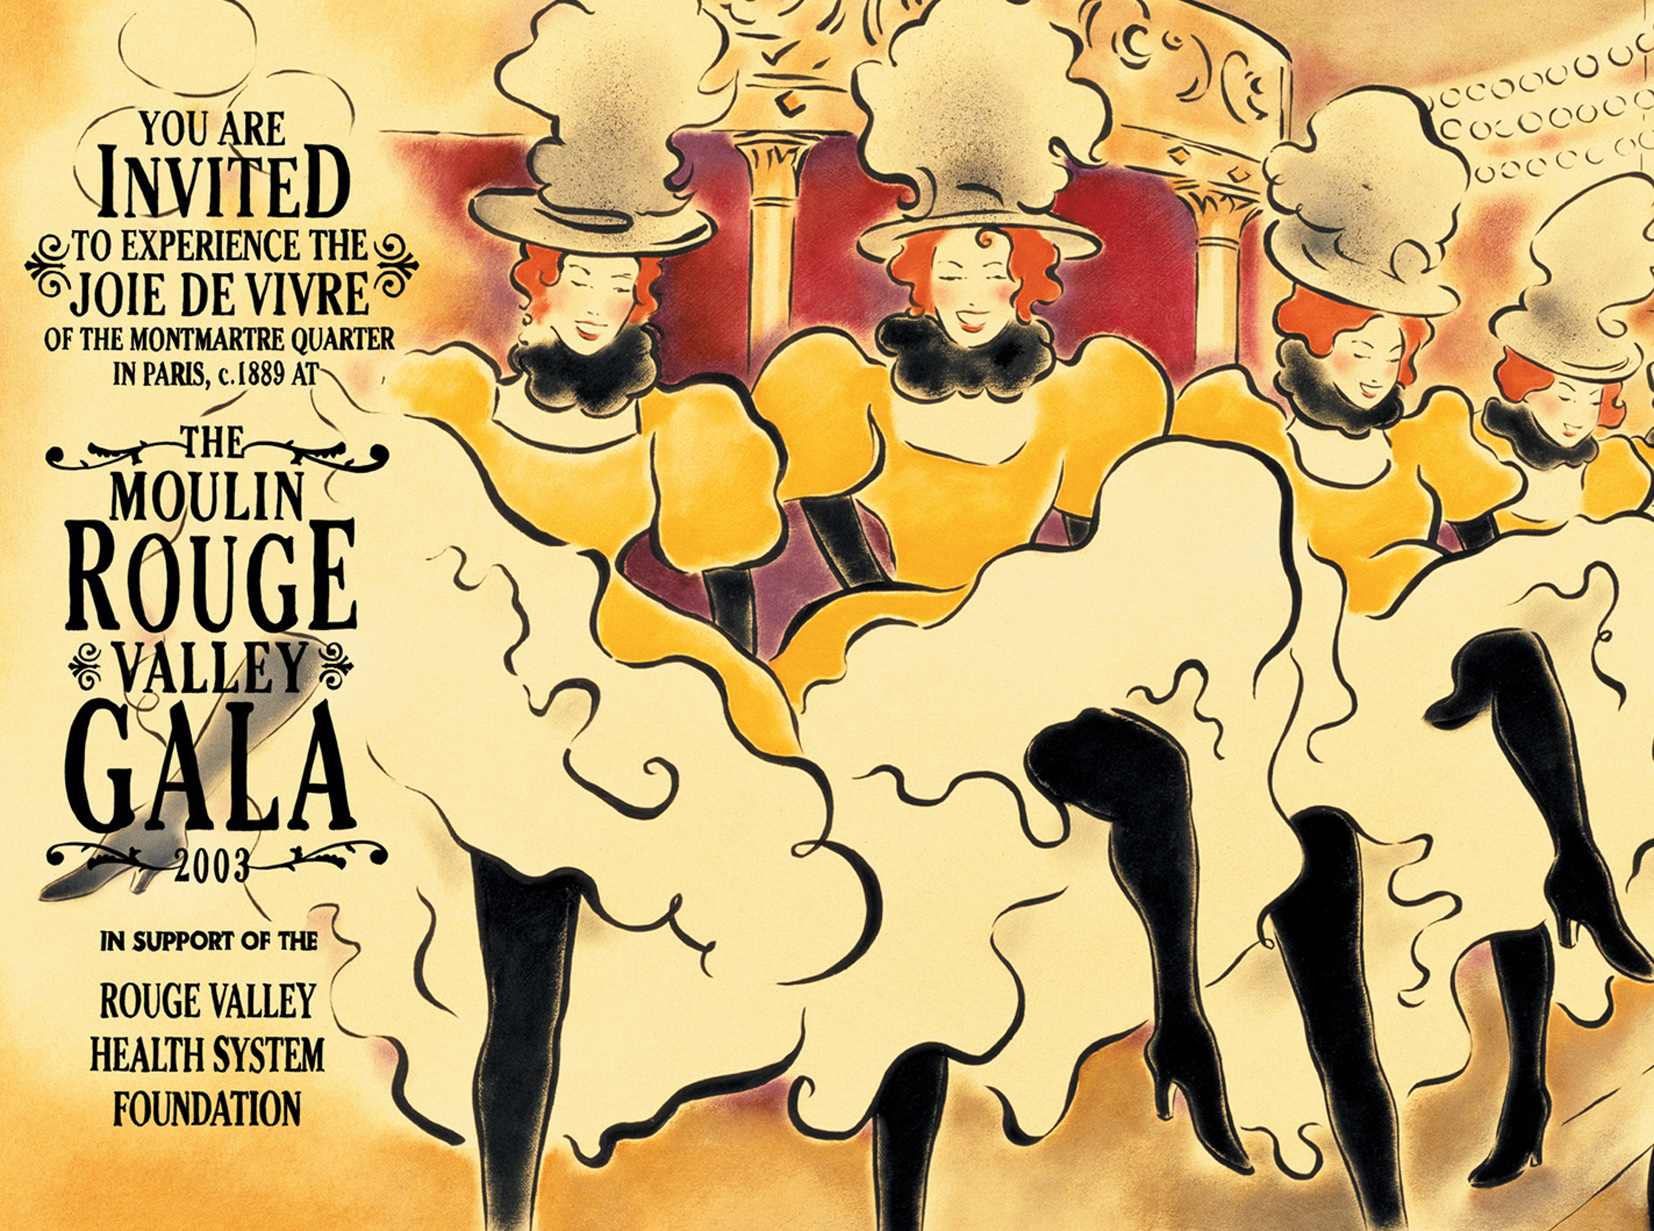 The Moulin Rouge Valley Gala Invite